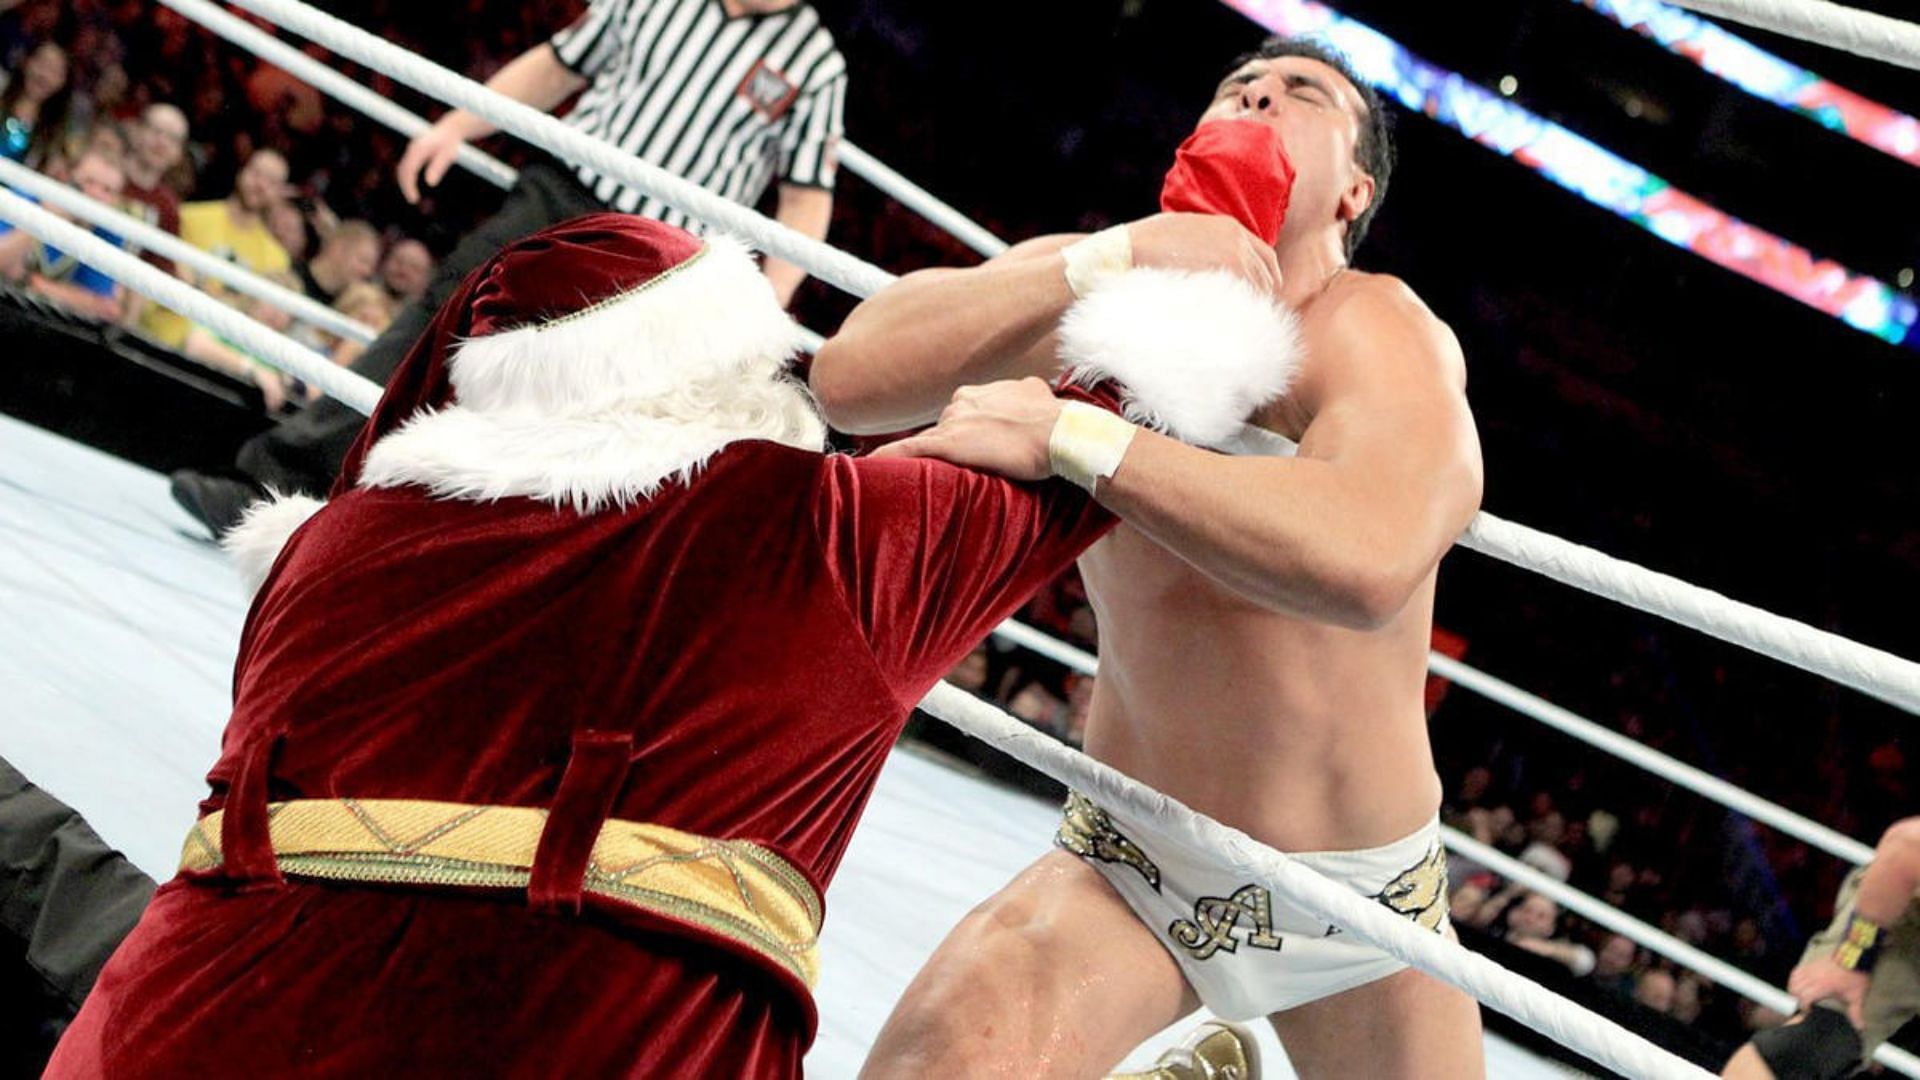 Santa Claus got revenged against the former WWE Champion later on